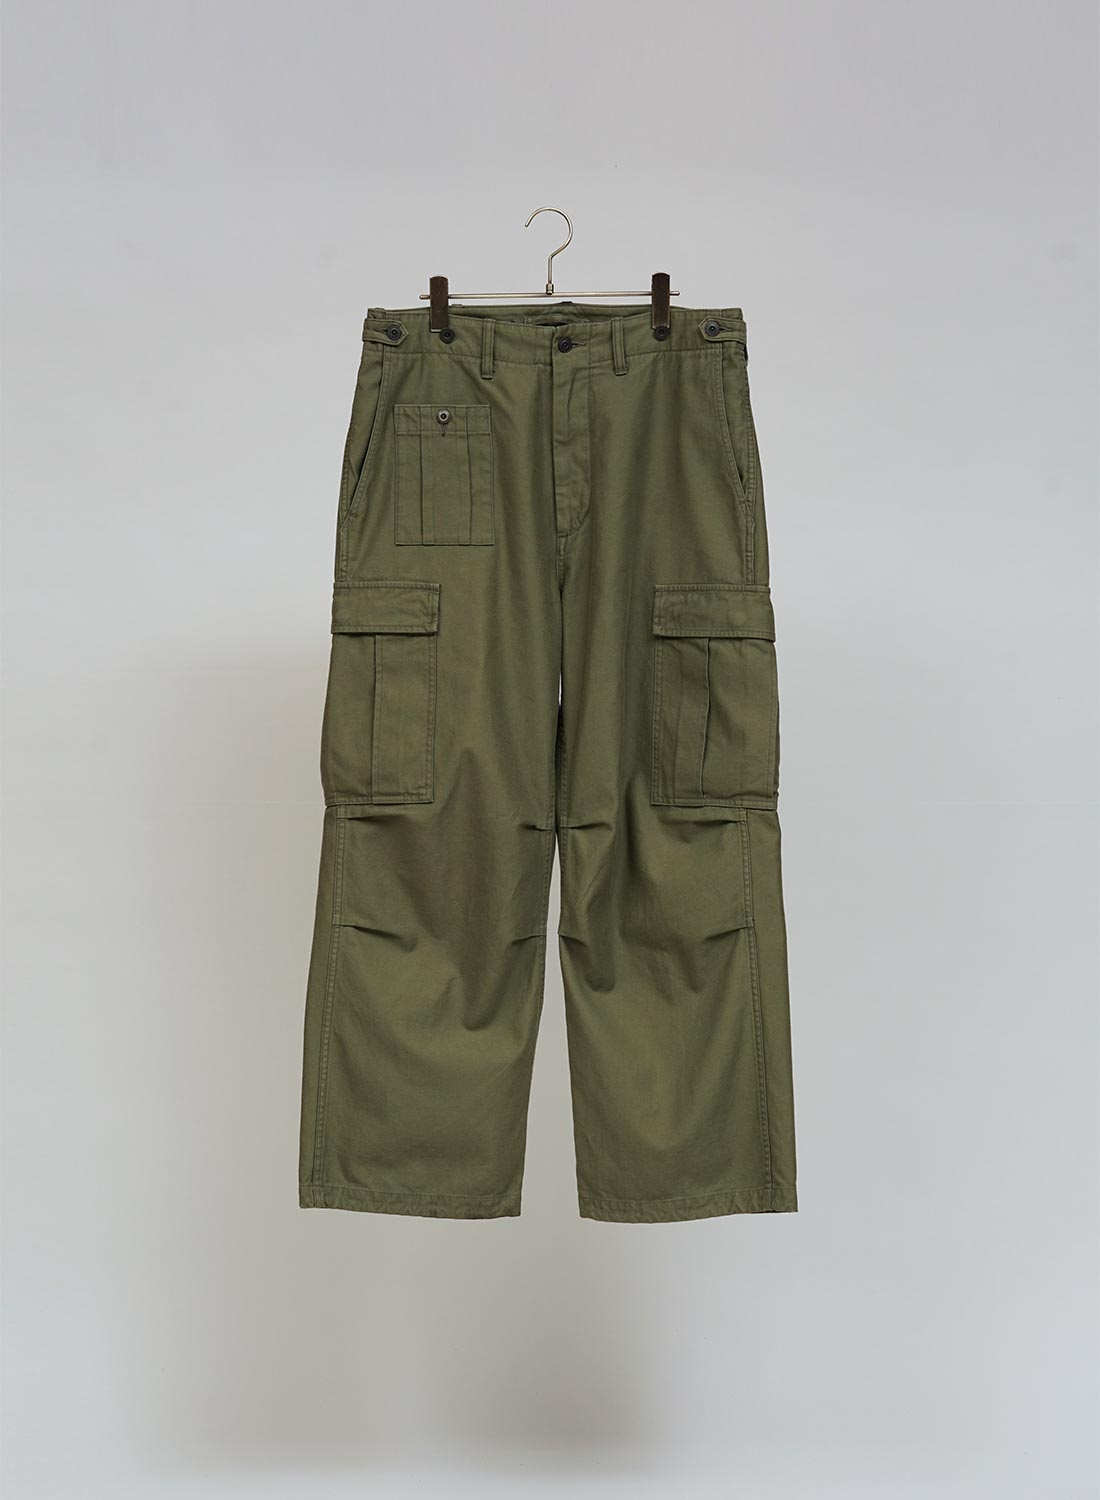 Army Cargo Pant in Dark Green